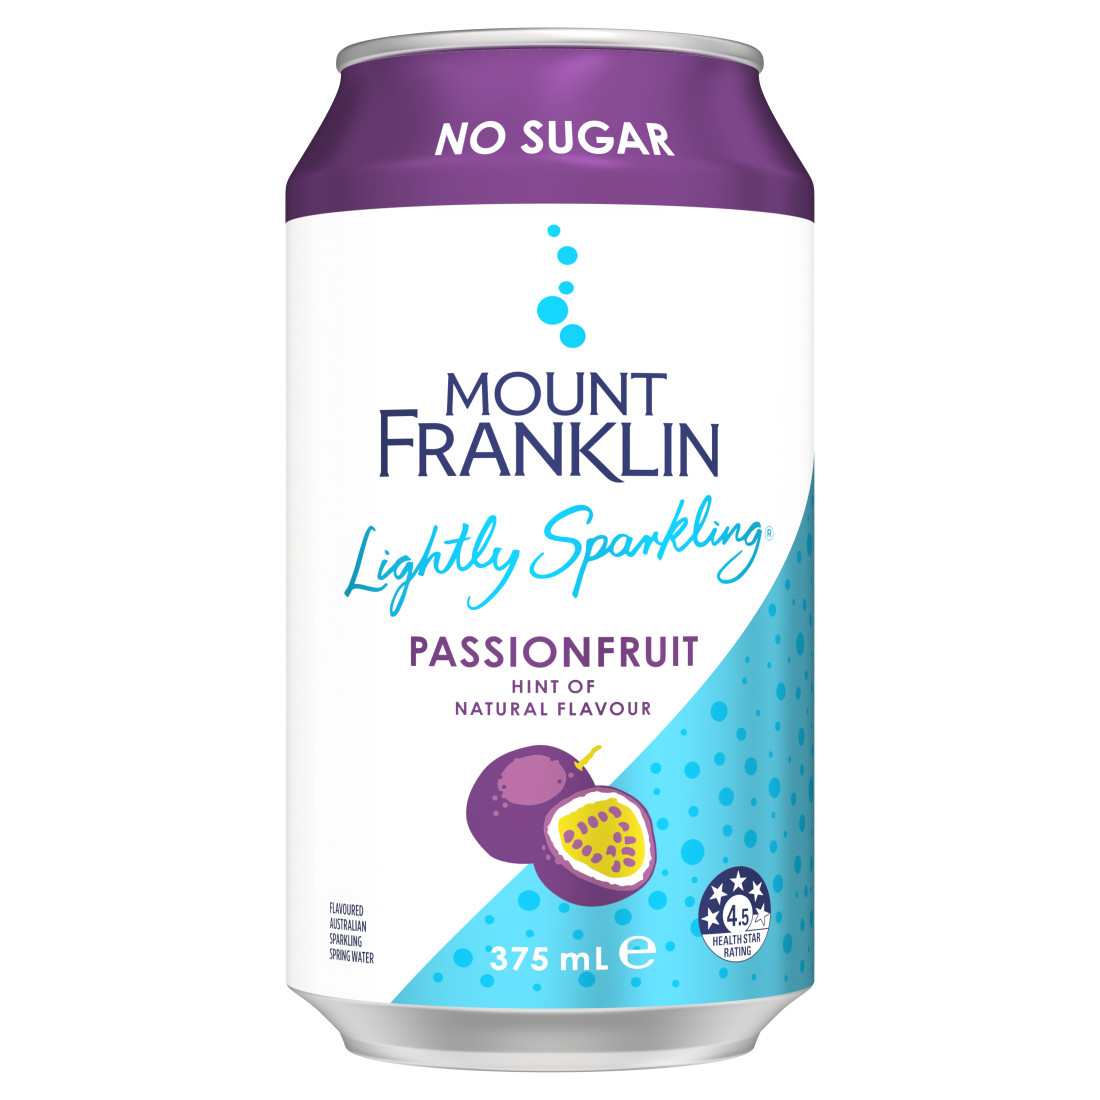 Mount Franklin Lightly Sparkling Passionfruit in a Can